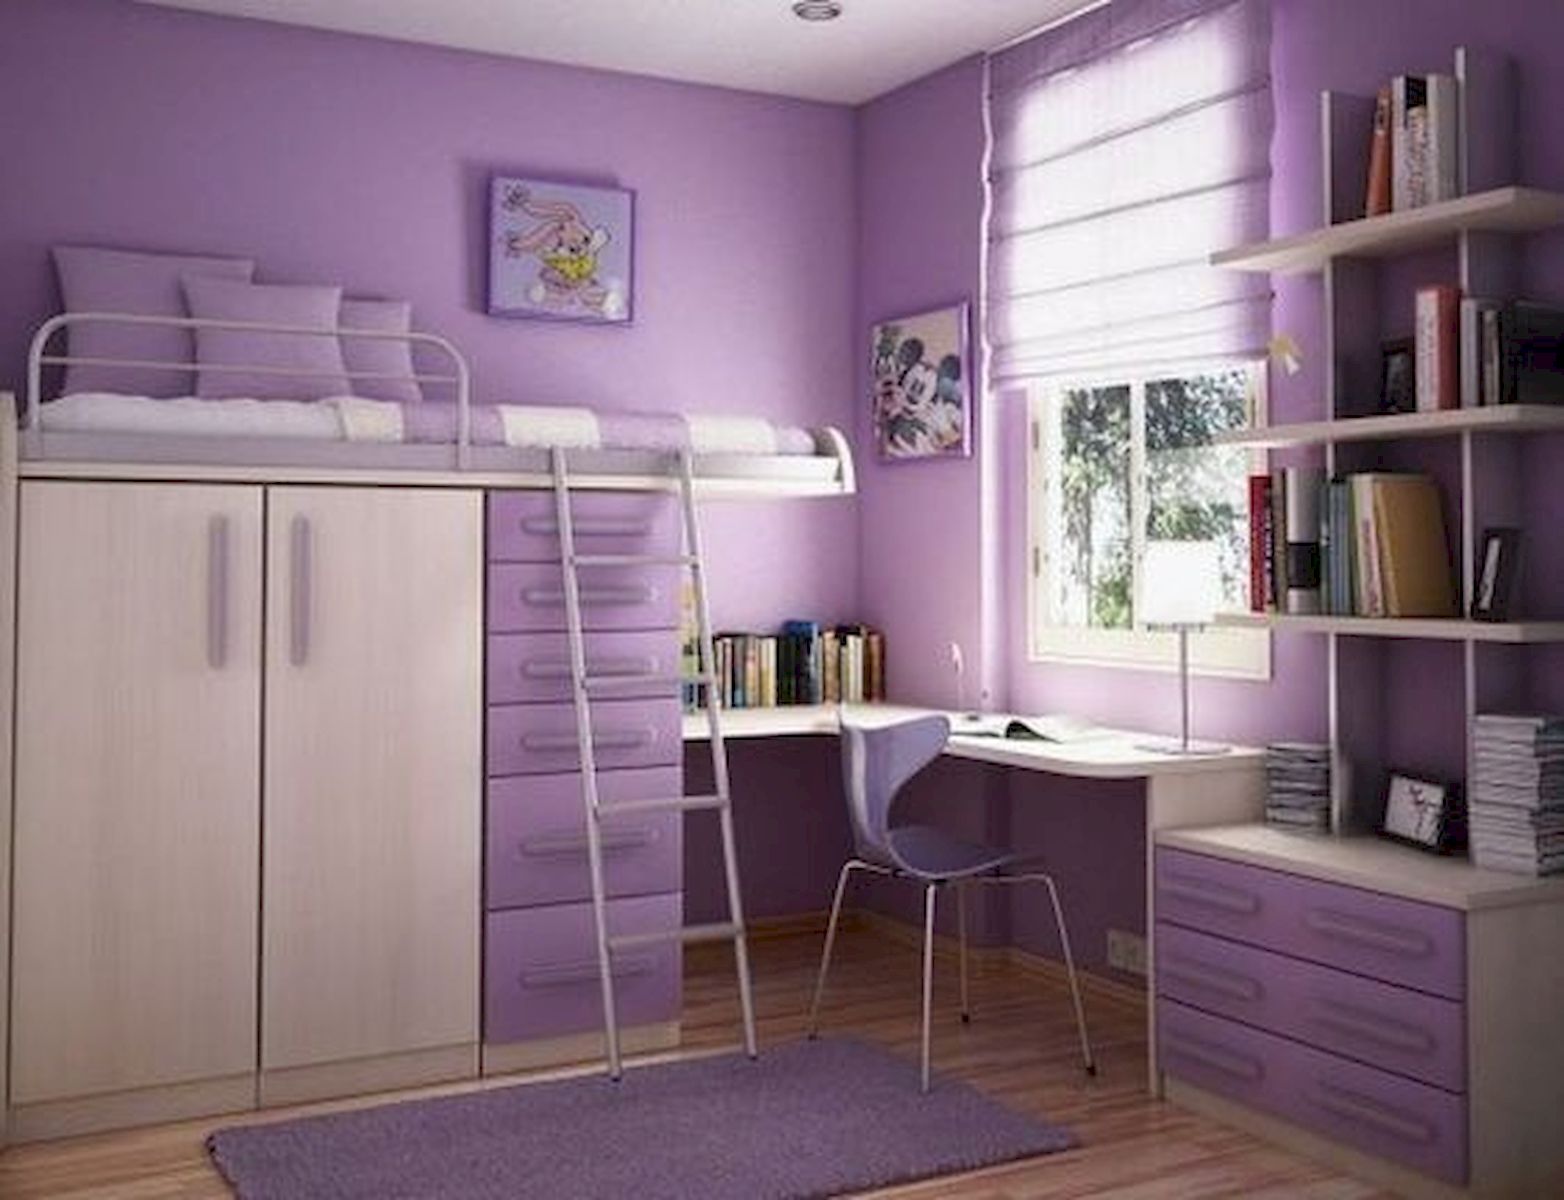 40 Cute Small Bedroom Design And Decor Ideas For Teenage Girl (7)